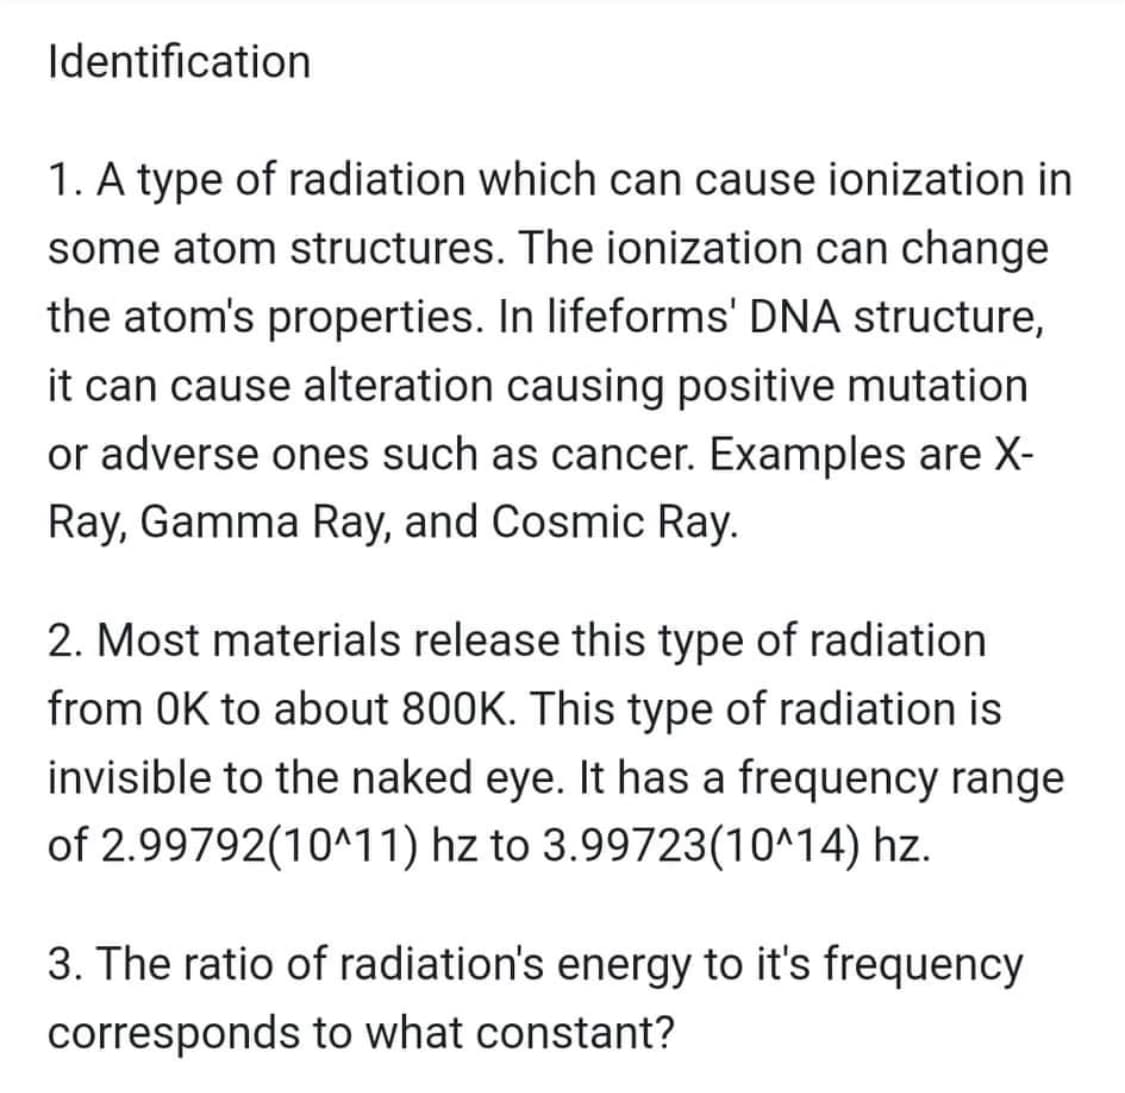 Identification
1. A type of radiation which can cause ionization in
some atom structures. The ionization can change
the atom's properties. In lifeforms' DNA structure,
it can cause alteration causing positive mutation
or adverse ones such as cancer. Examples are X-
Ray, Gamma Ray, and Cosmic Ray.
2. Most materials release this type of radiation
from OK to about 800K. This type of radiation is
invisible to the naked eye. It has a frequency range
of 2.99792(10^11) hz to 3.99723(10^14) hz.
3. The ratio of radiation's energy to it's frequency
corresponds to what constant?